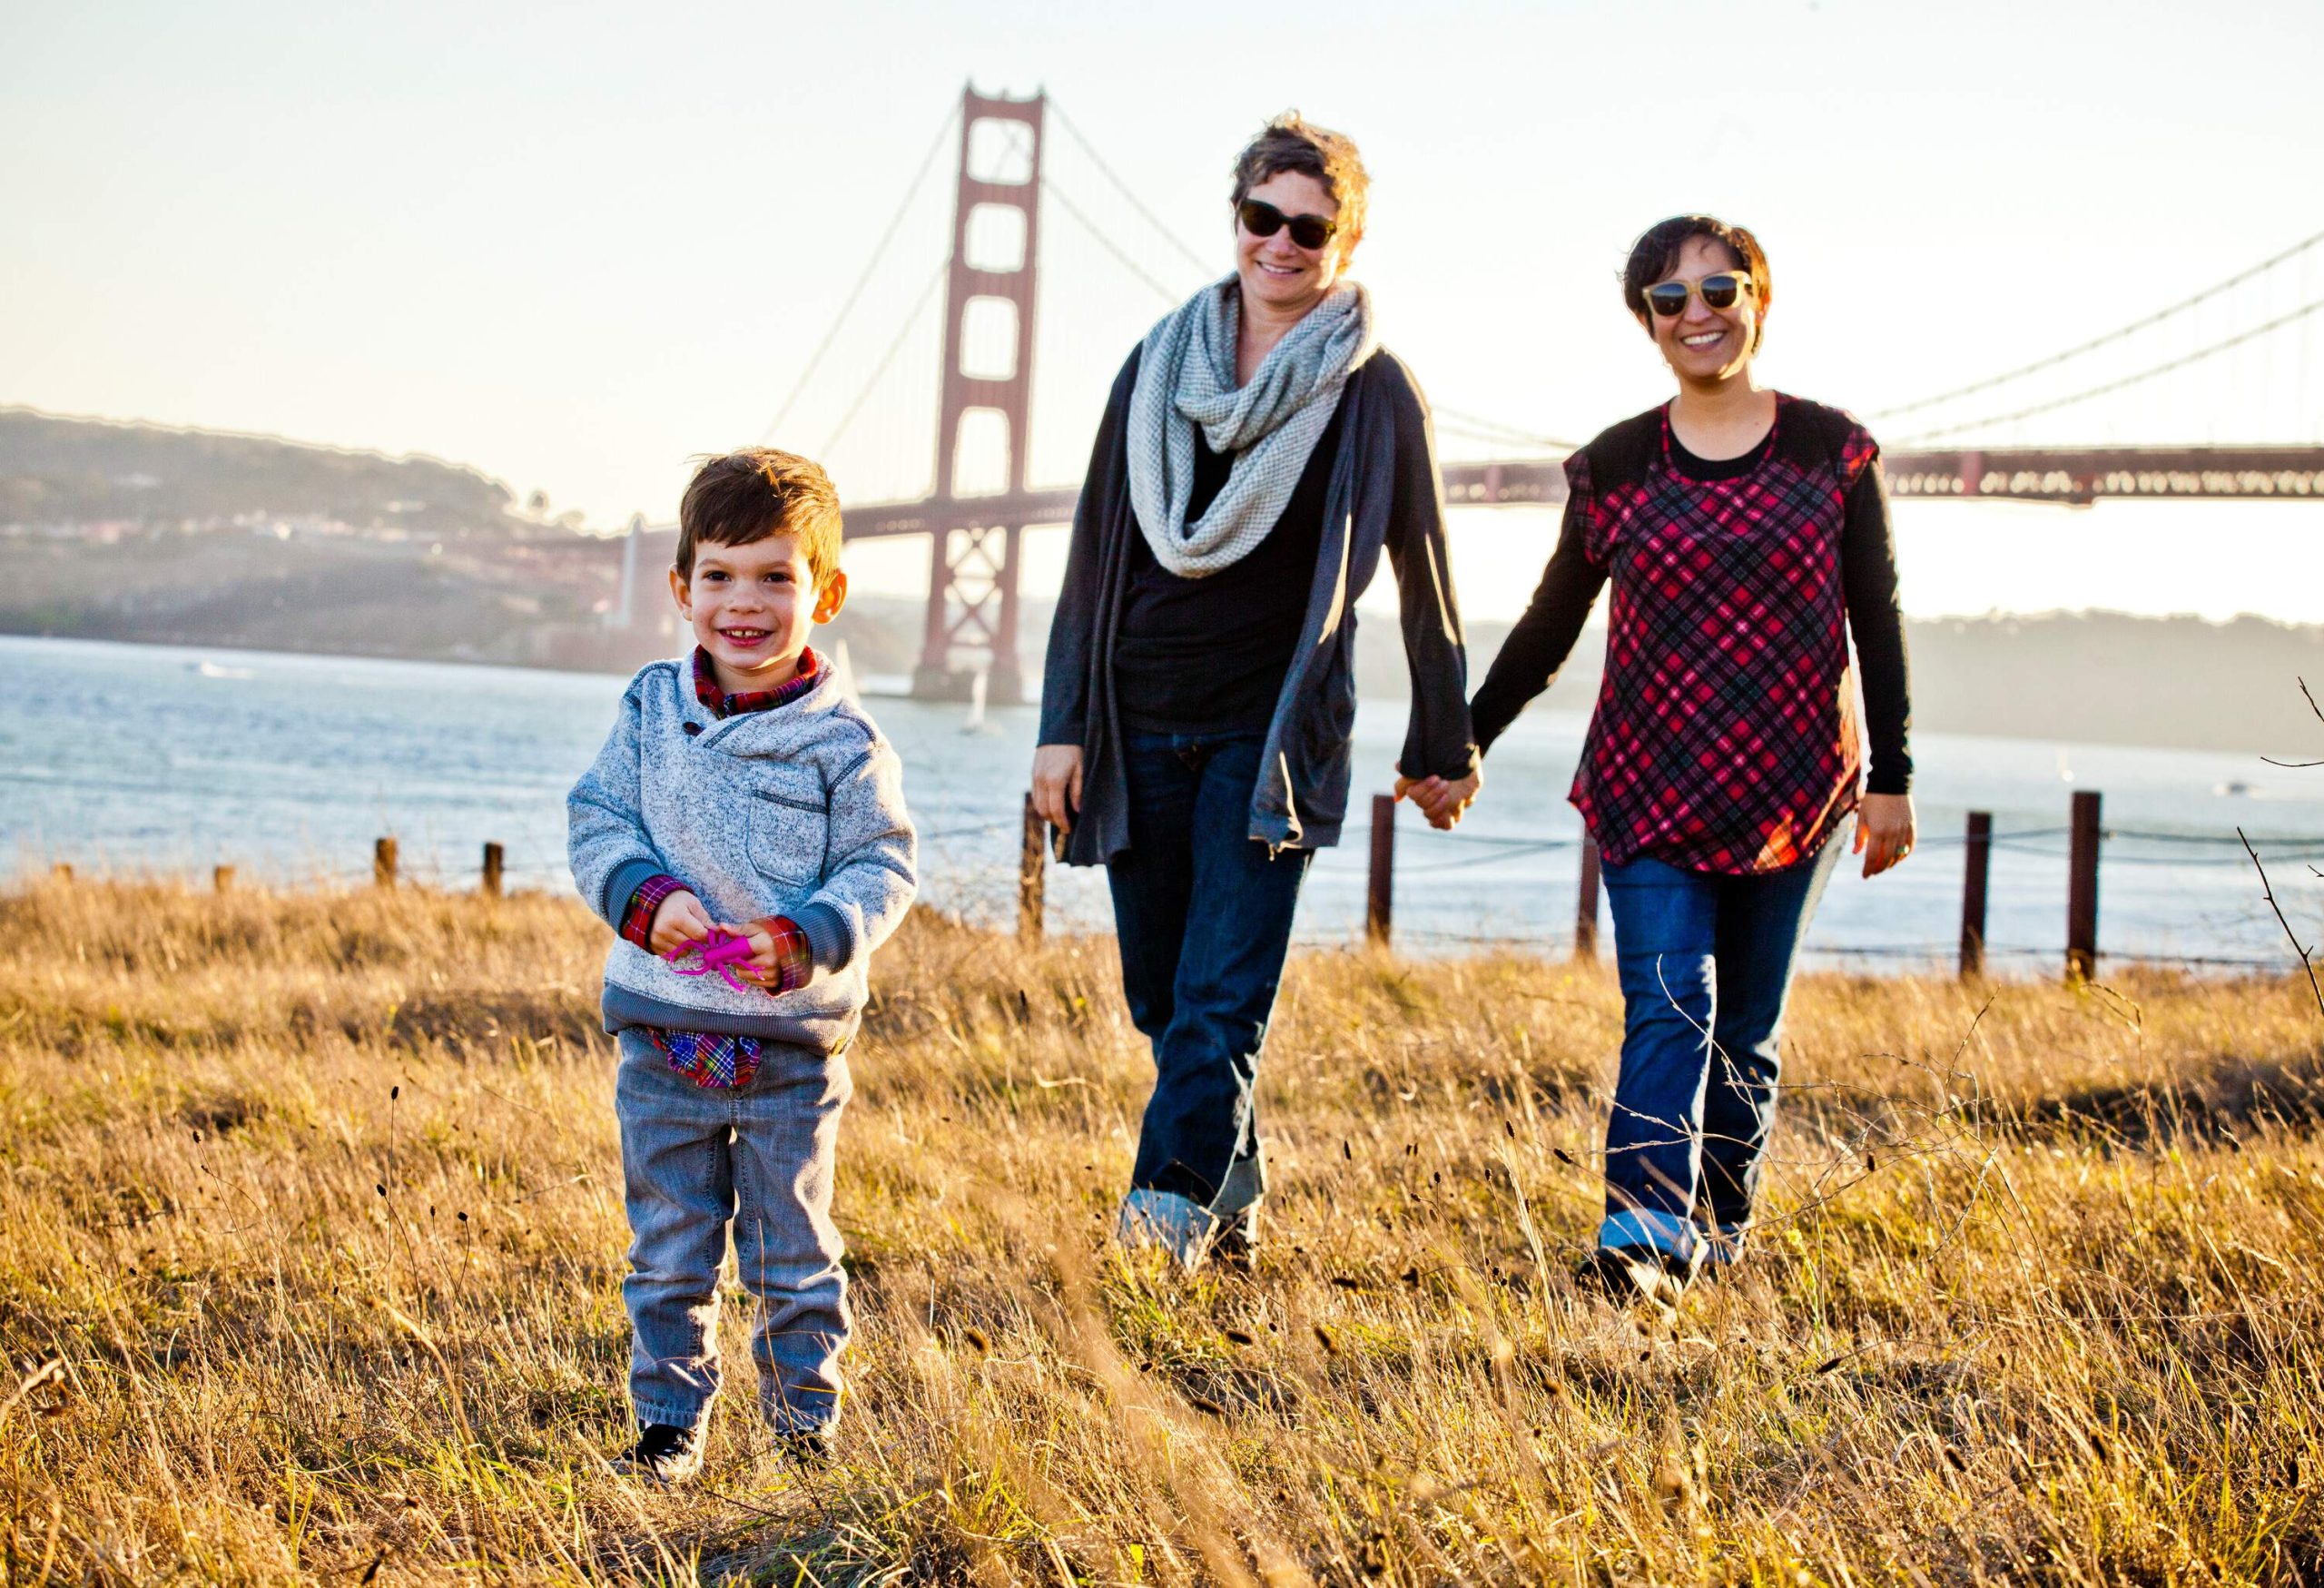 A family of three standing on a grassland with the San Francisco bridge in the distance.